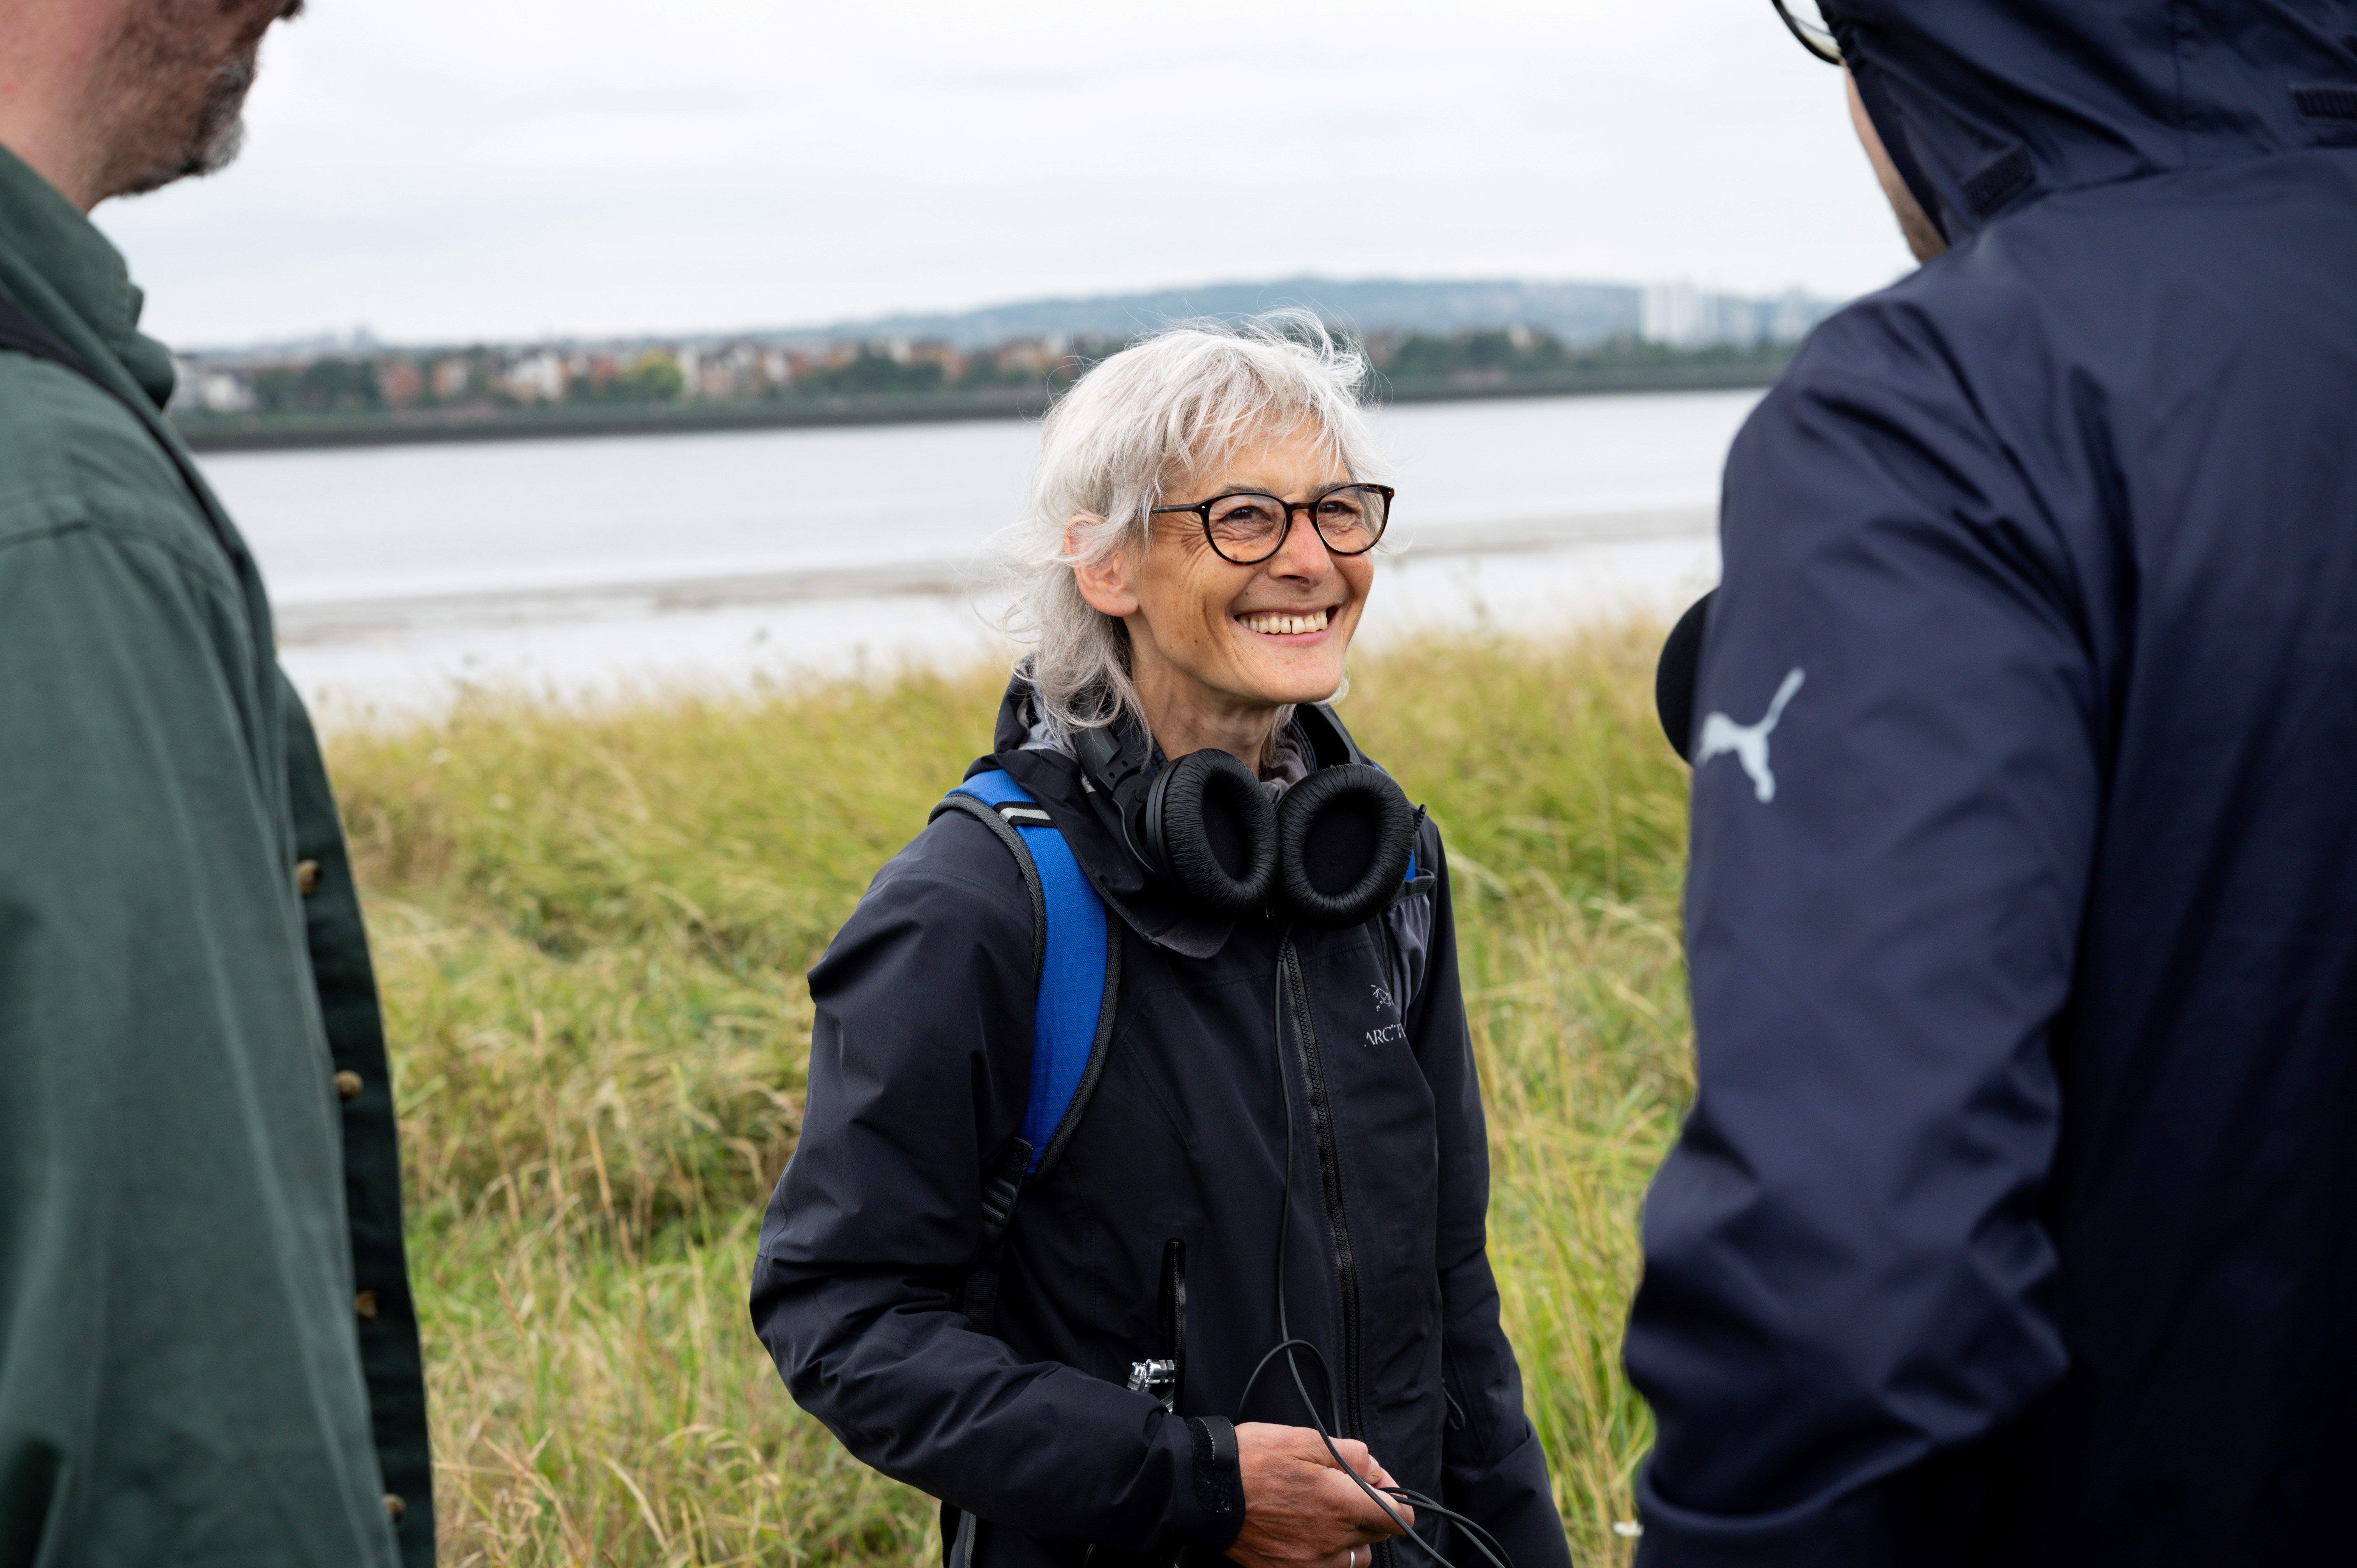 An image of artist Catherine Yass- a woman with white hair and black framed glasses, with a pair of headphones around her neck, in a blue rain mac with river behind her.